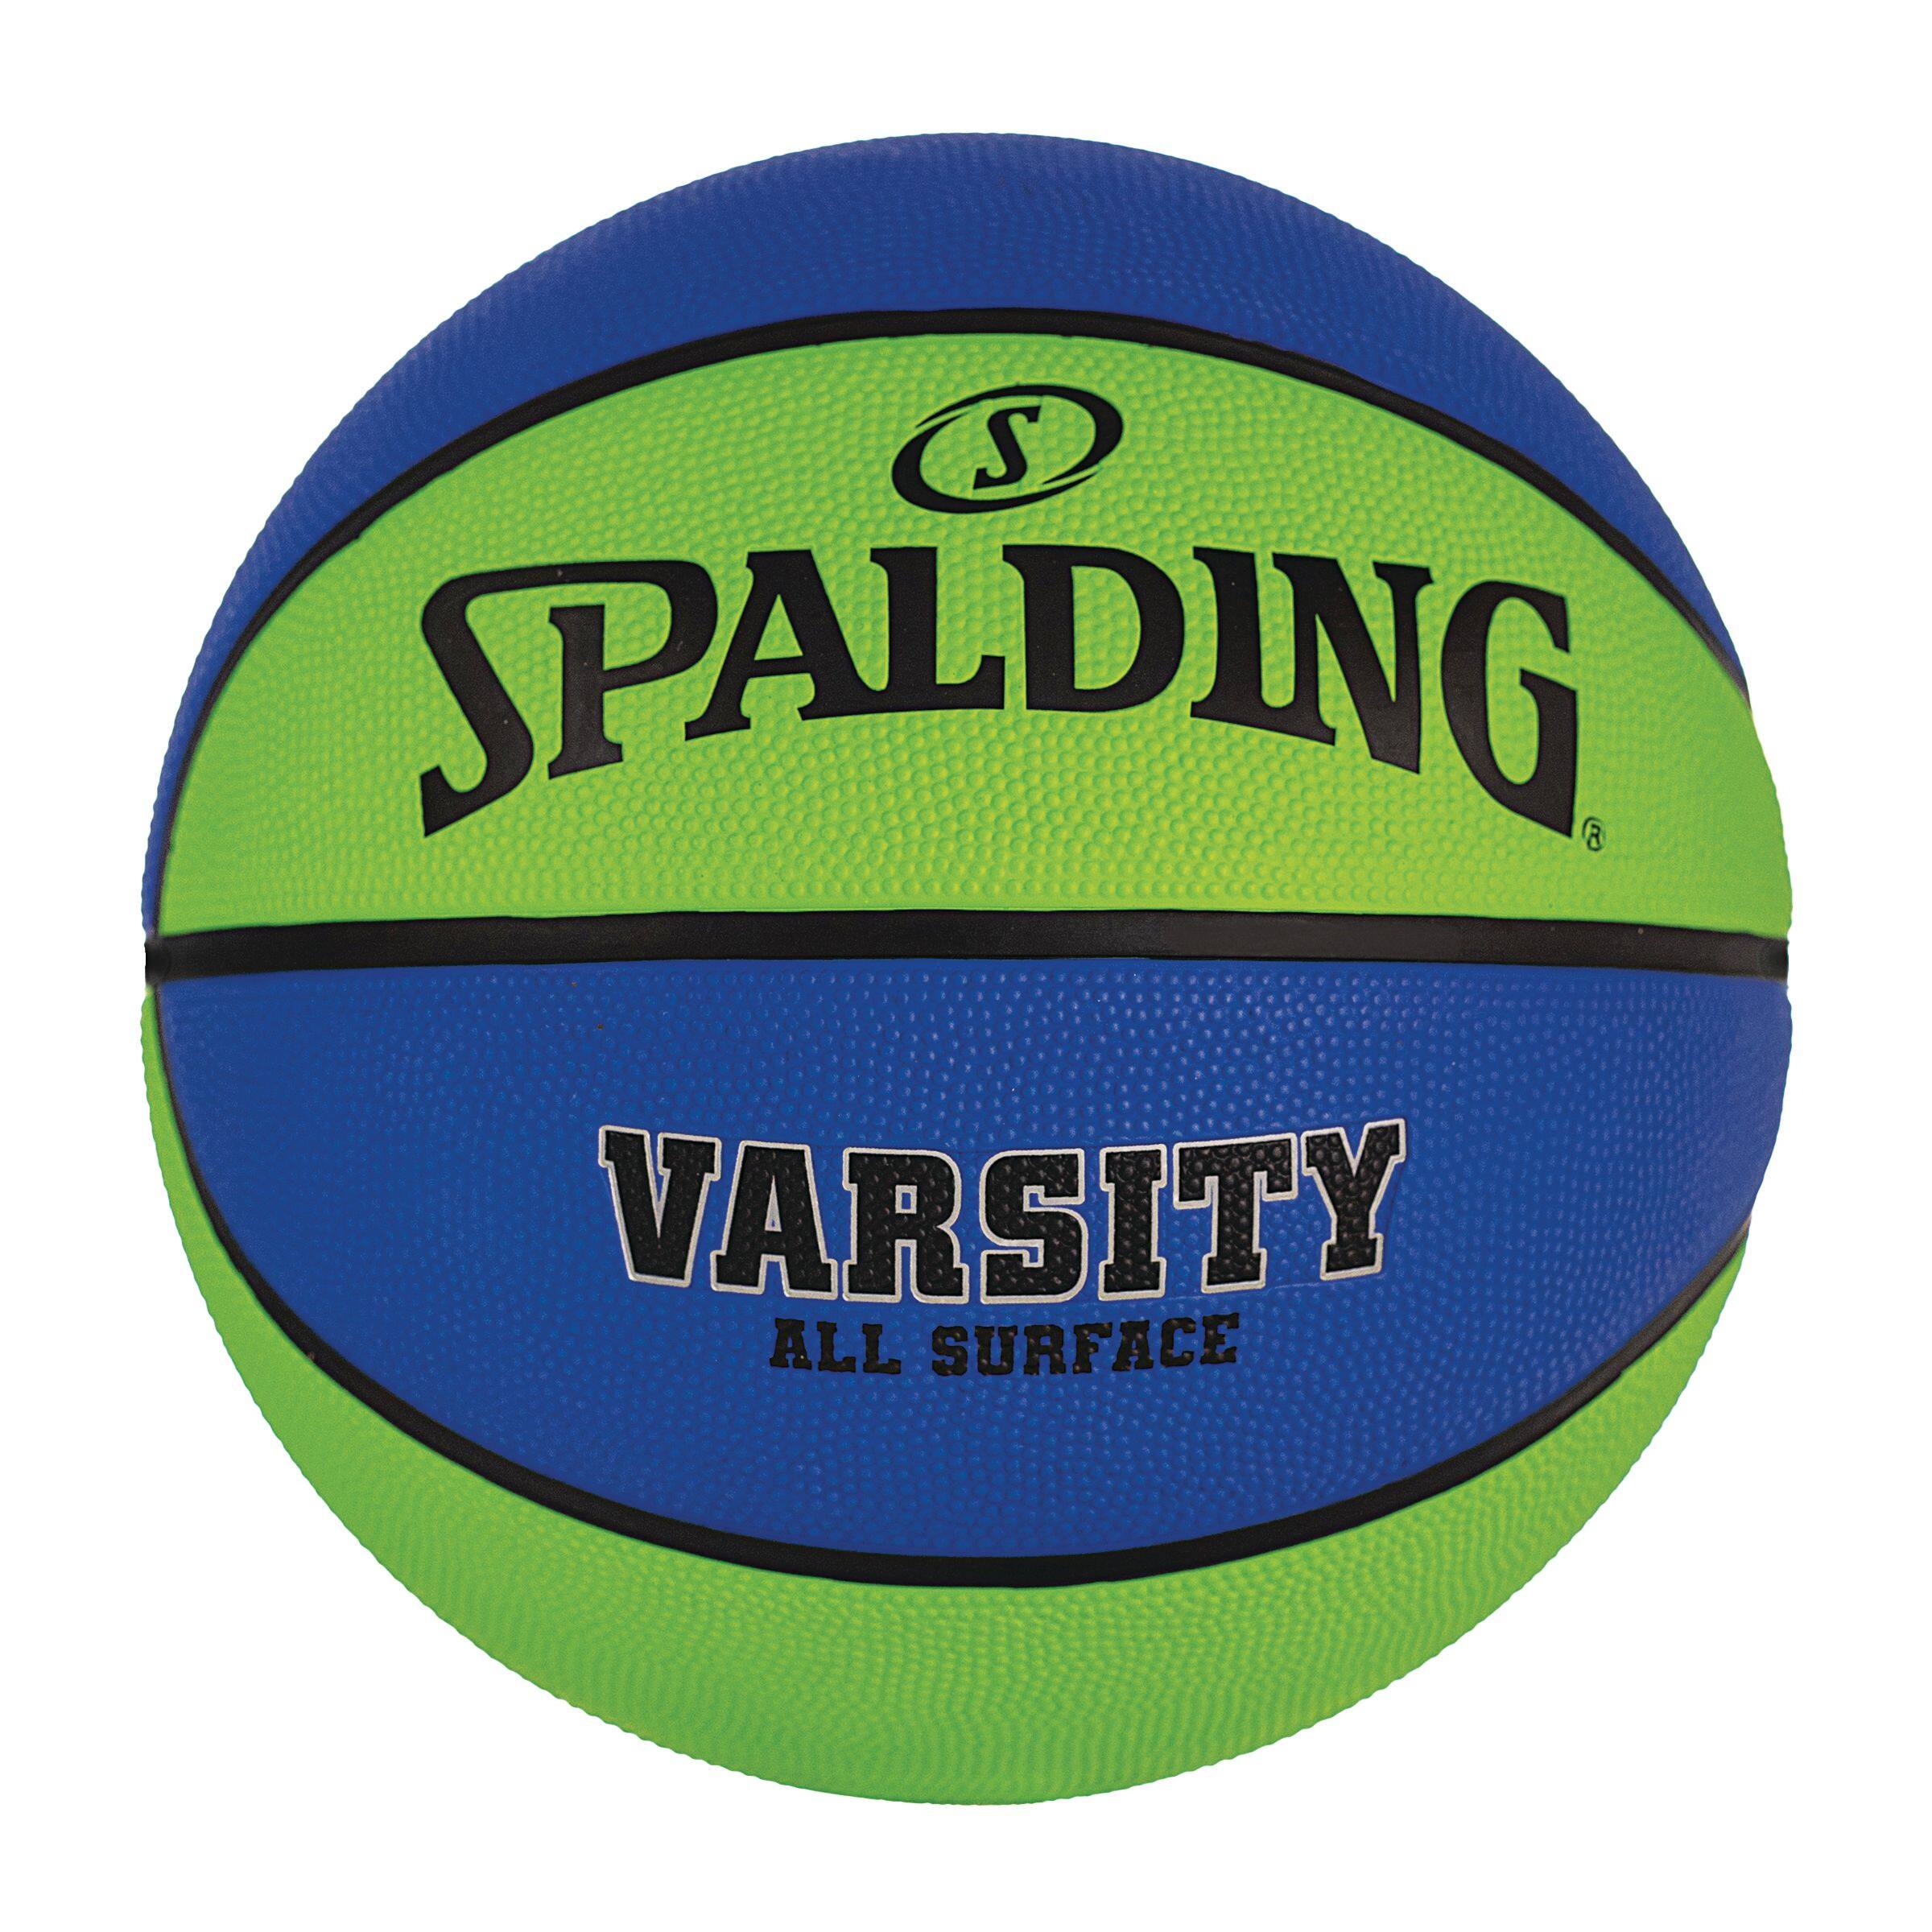 Spalding Varsity All Surface Outdoor Rubber Basketball, Official Size 7  (29.5-in), Blue/Green